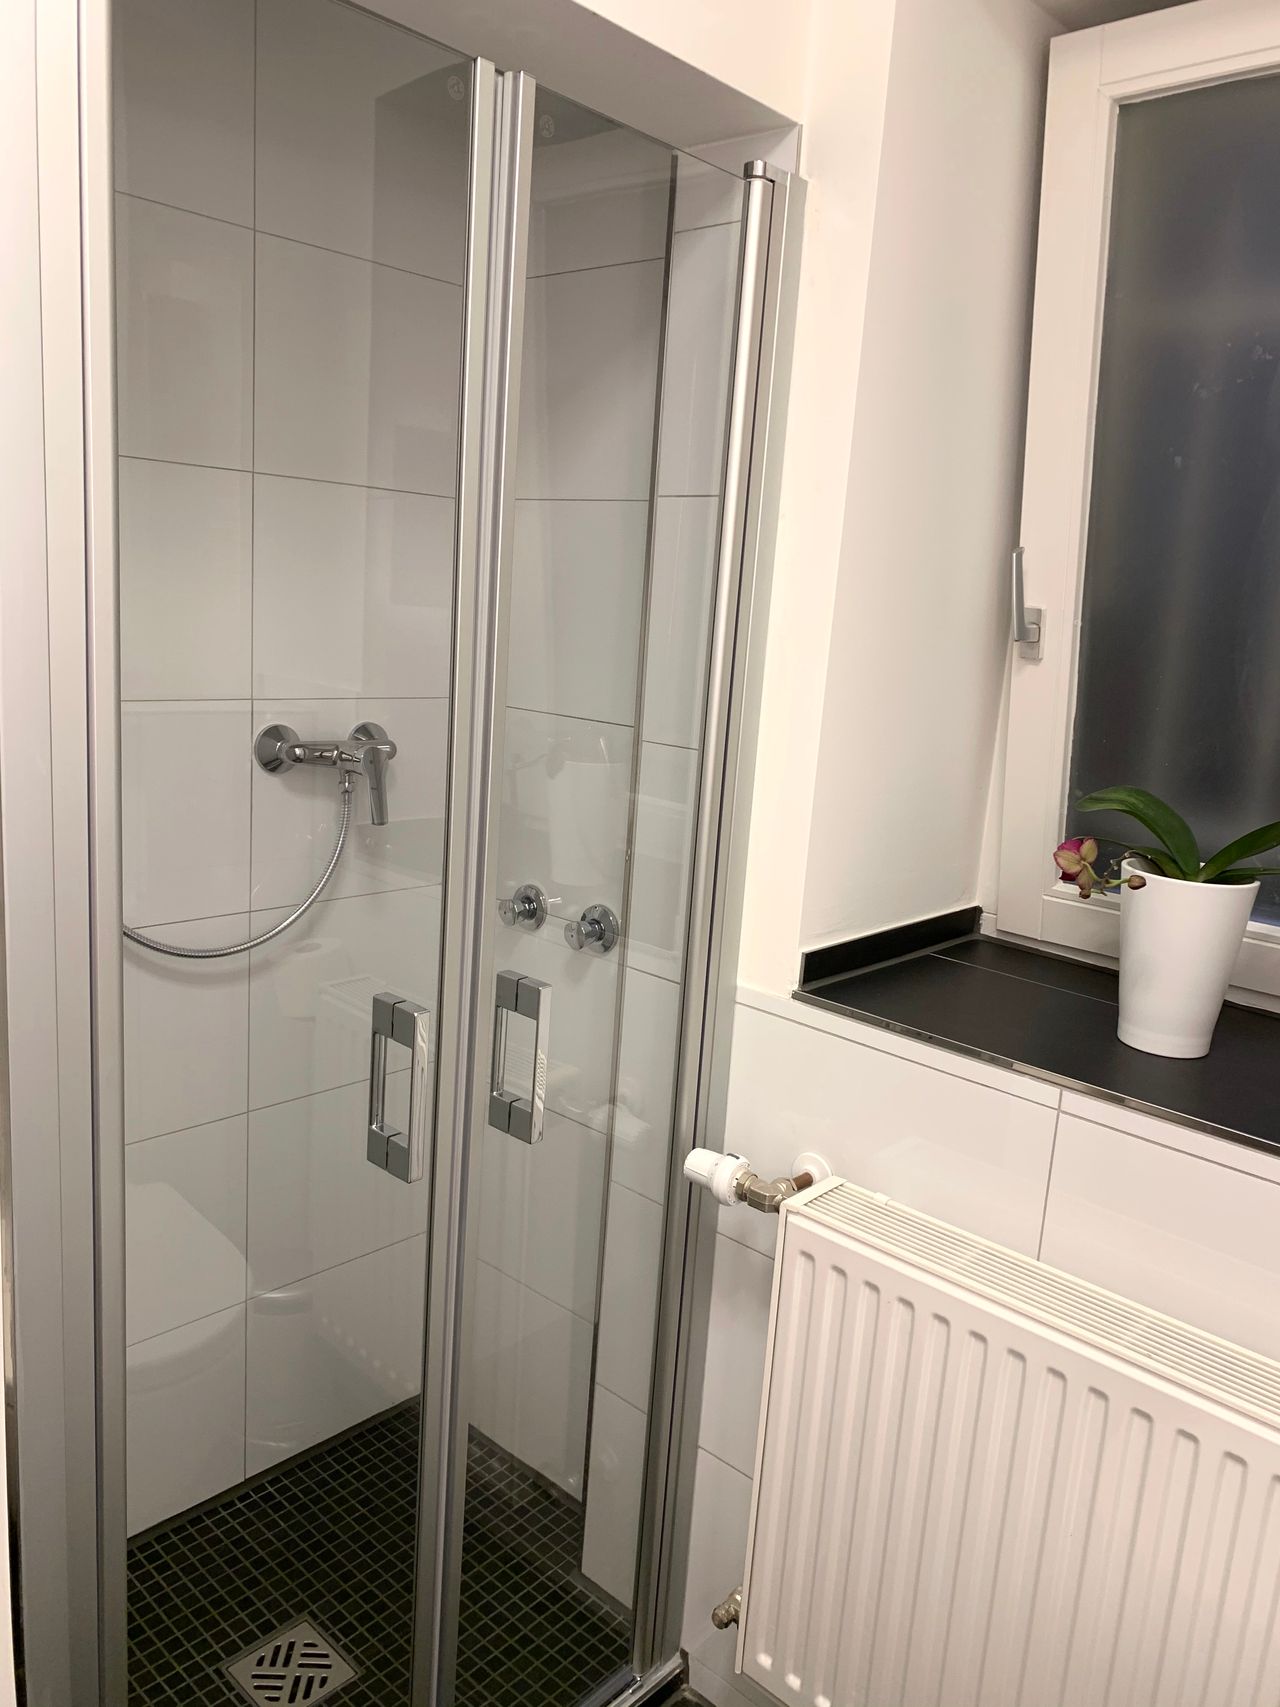 Modern & quiet 2-room flat in Cologne Lindenthal with garden view - 2 minutes away from citypark